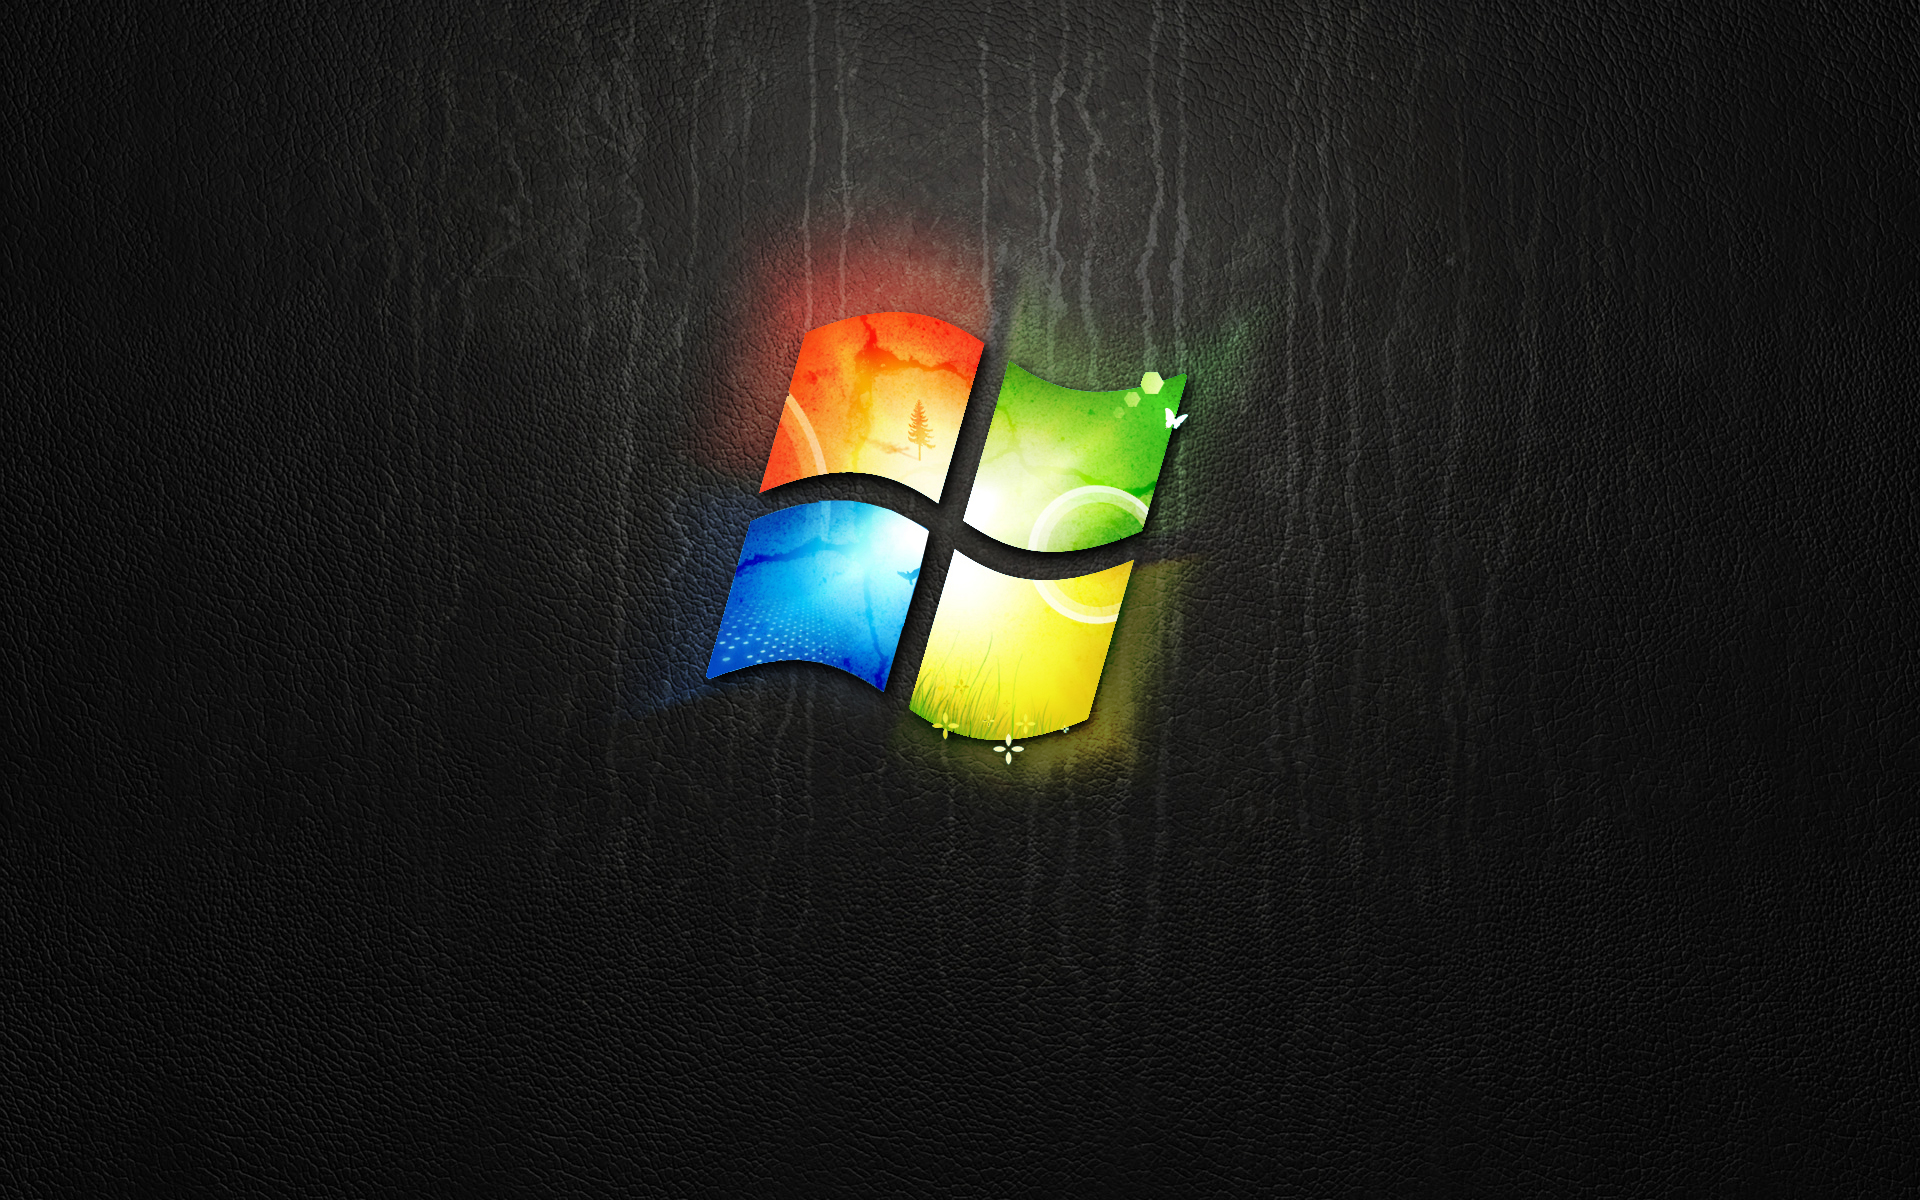 Awesome Windows Wallpaper